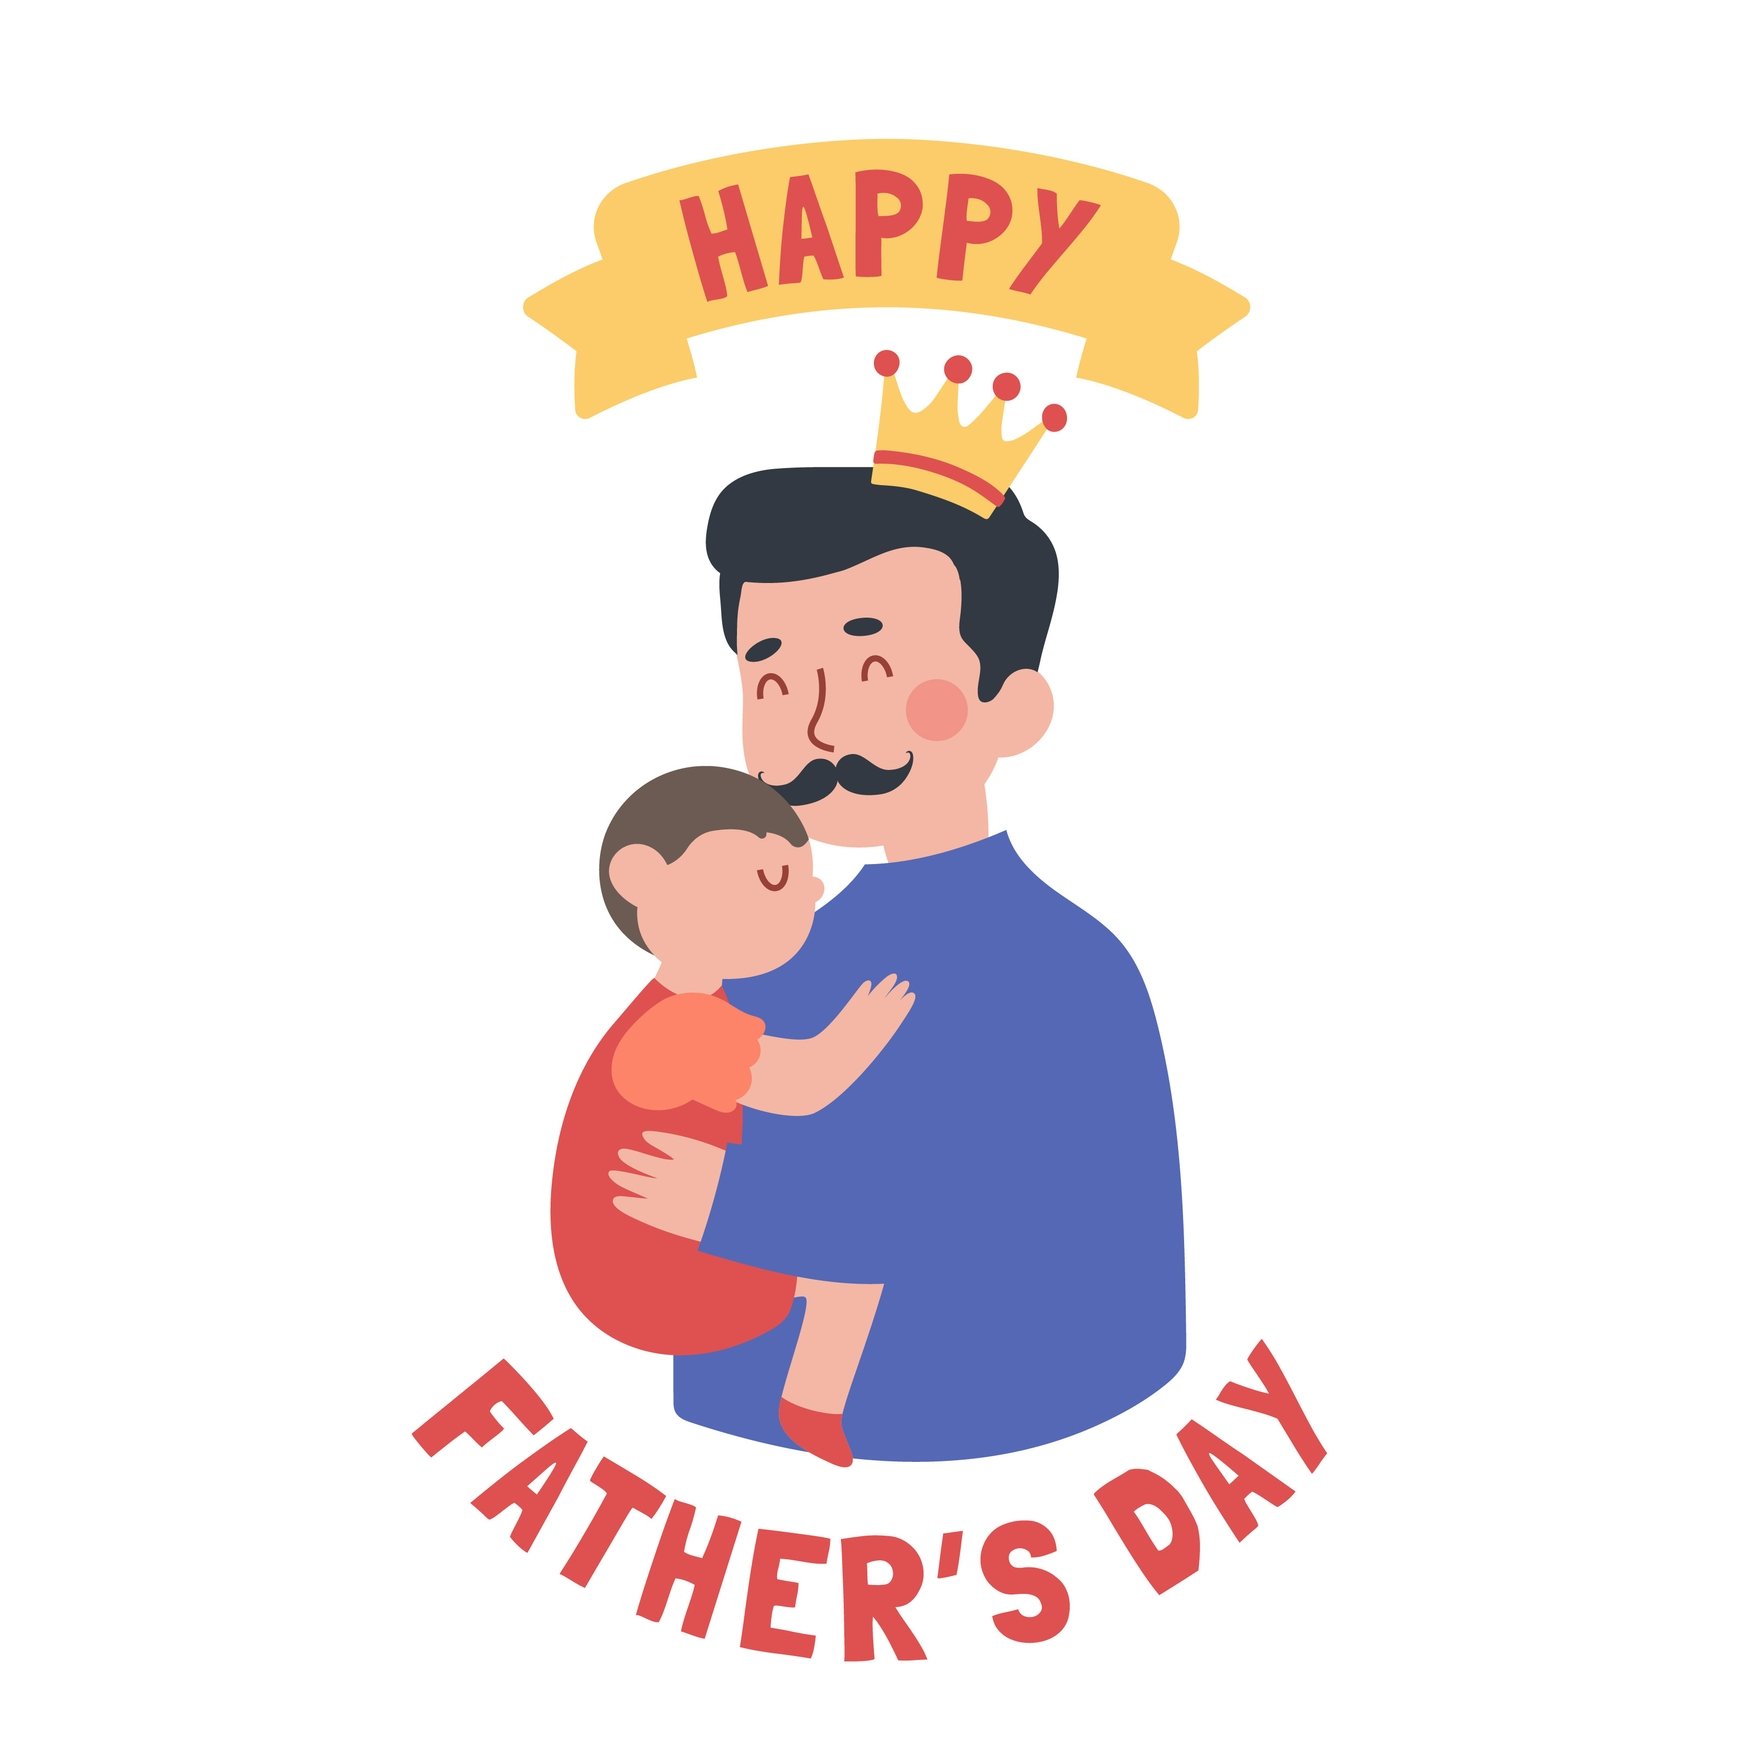 Free Happy Father's Day Gif in Illustrator, EPS, SVG, JPG, GIF, PNG, After Effects